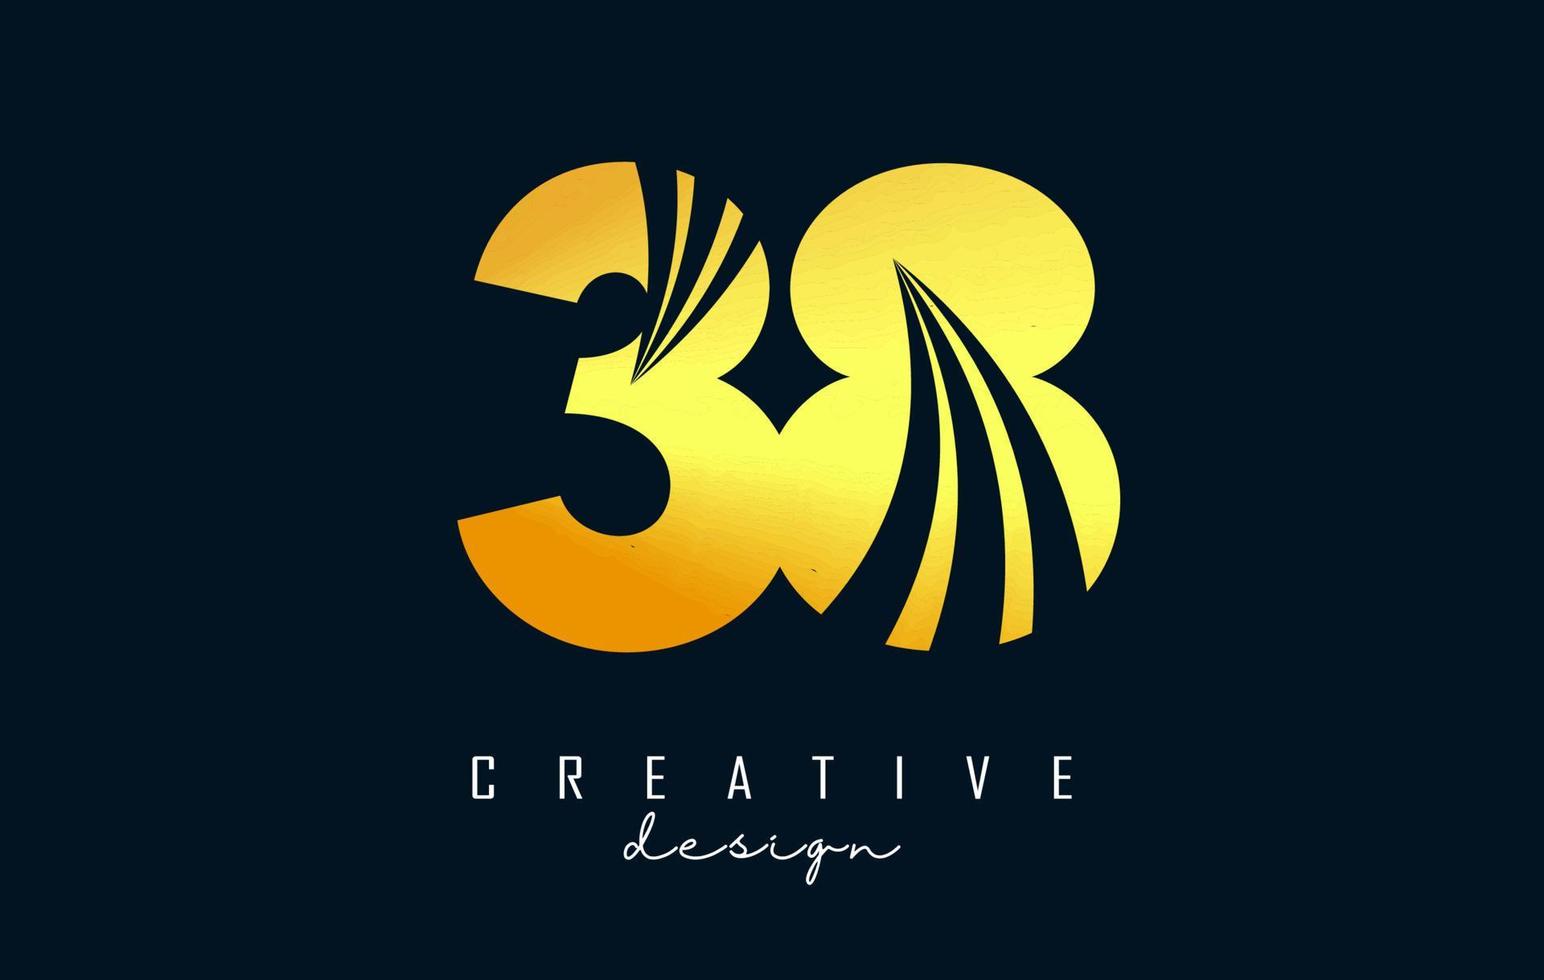 Golden Creative number 38 3 8 logo with leading lines and road concept design. Number with geometric design. vector